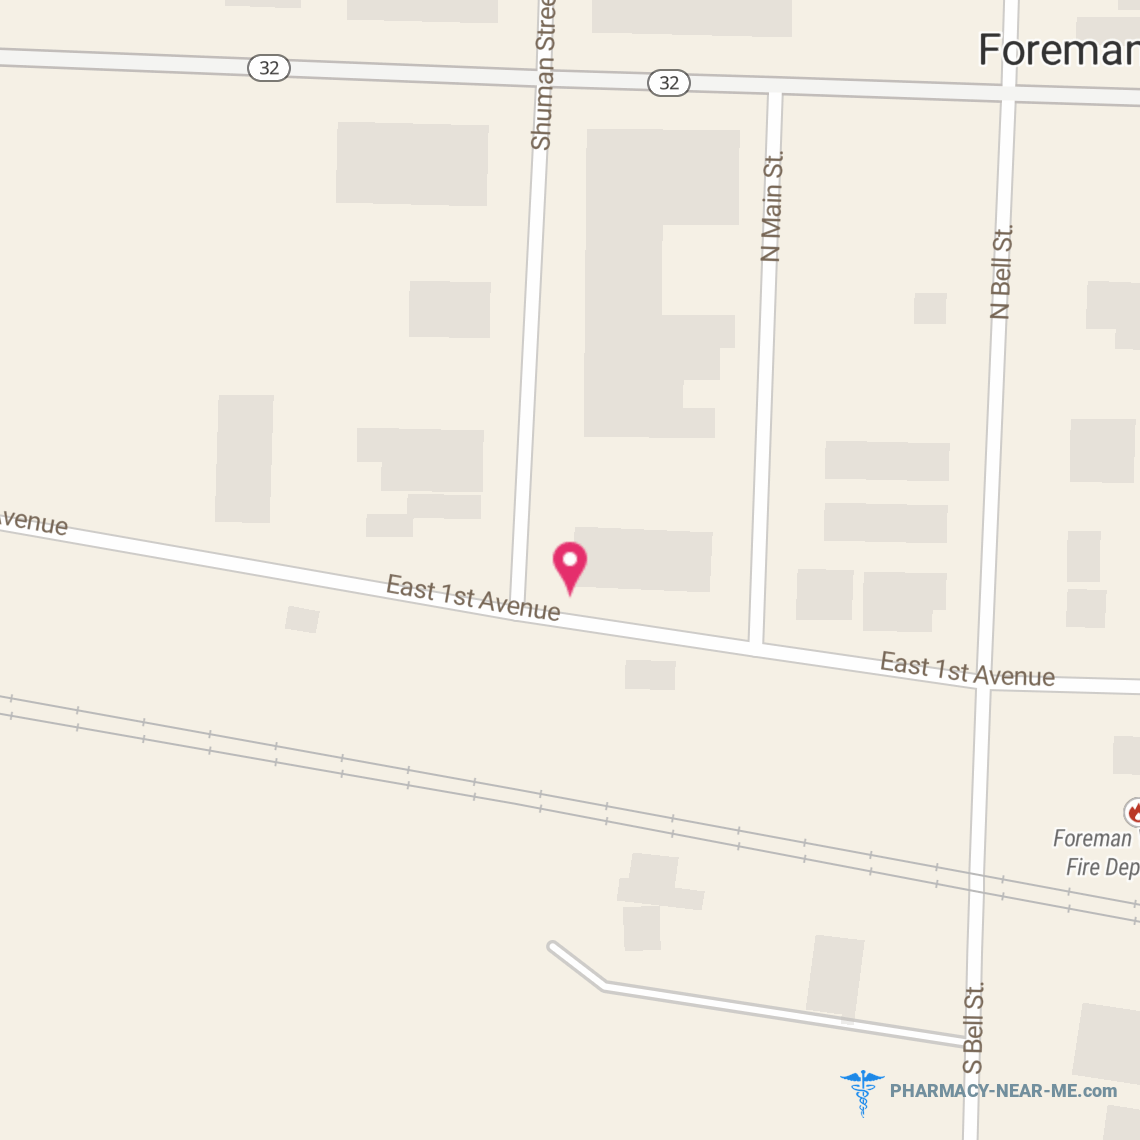 FOREMAN PHARMACY - Pharmacy Hours, Phone, Reviews & Information: 106 Schuman St, Foreman, Arkansas 71836, United States